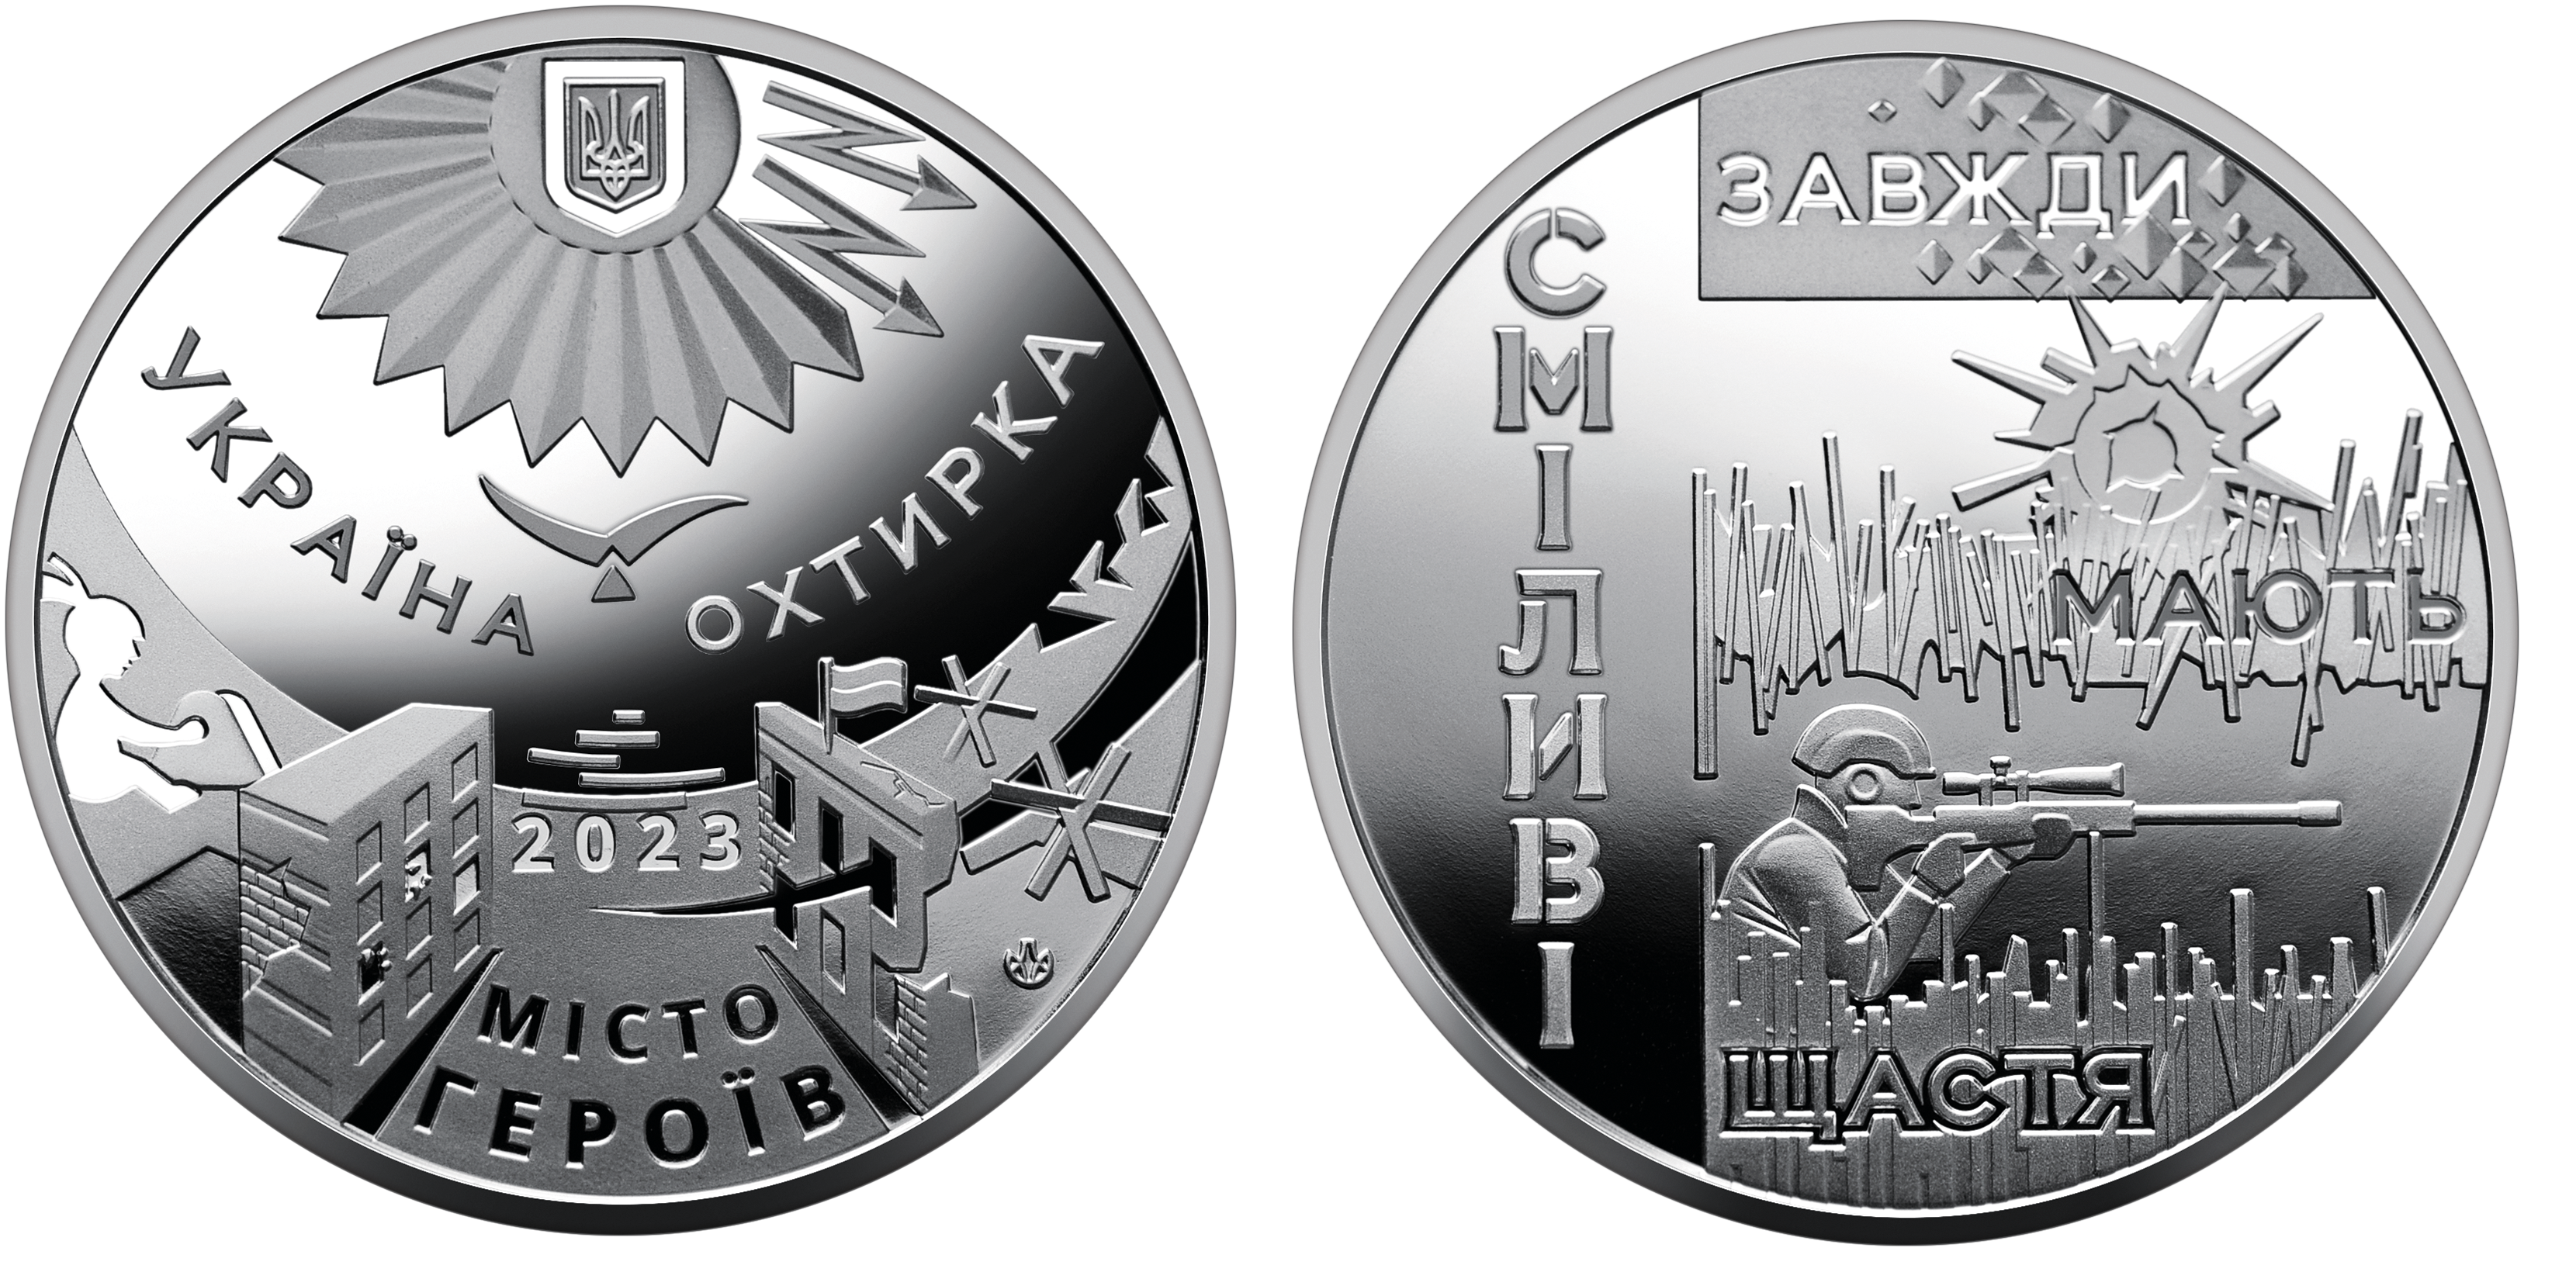 Sale of commemorative coins from MTB BANK • buy commemorative coins in Ukraine at MTB BANK - photo 6 - mtb.ua